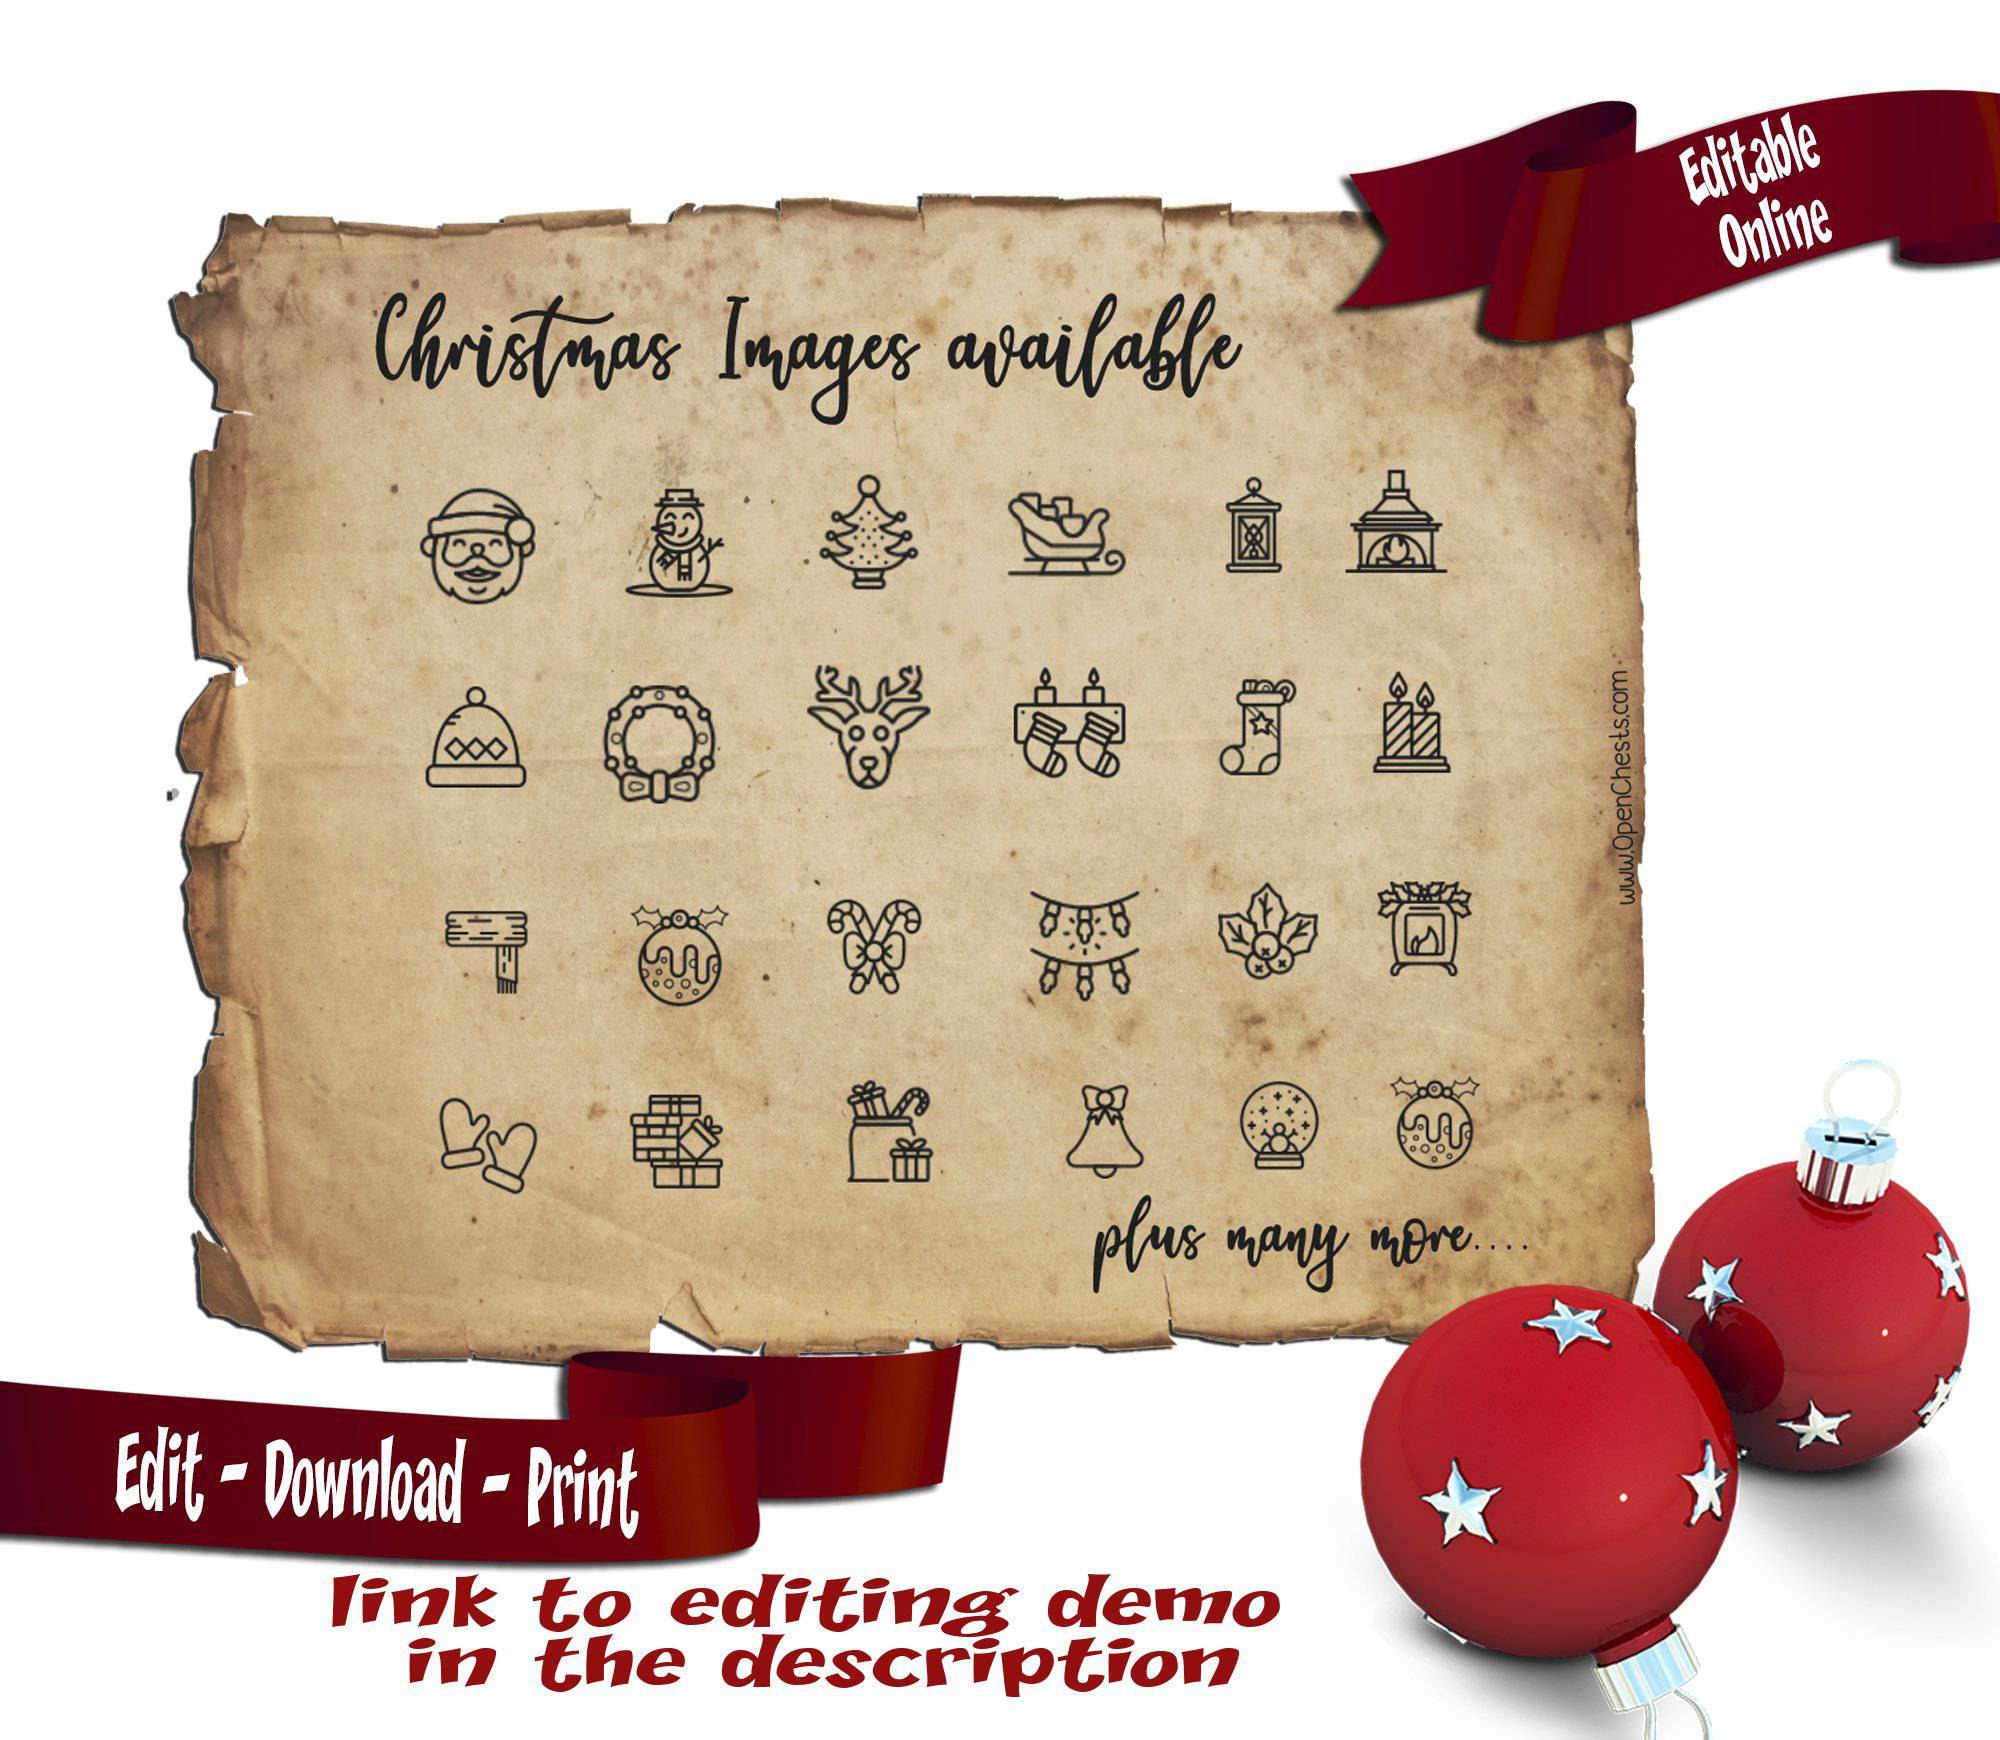 Santa Claus Christmas Treasure Map; solutions for Large Presents and no xmas tree - Open Chests